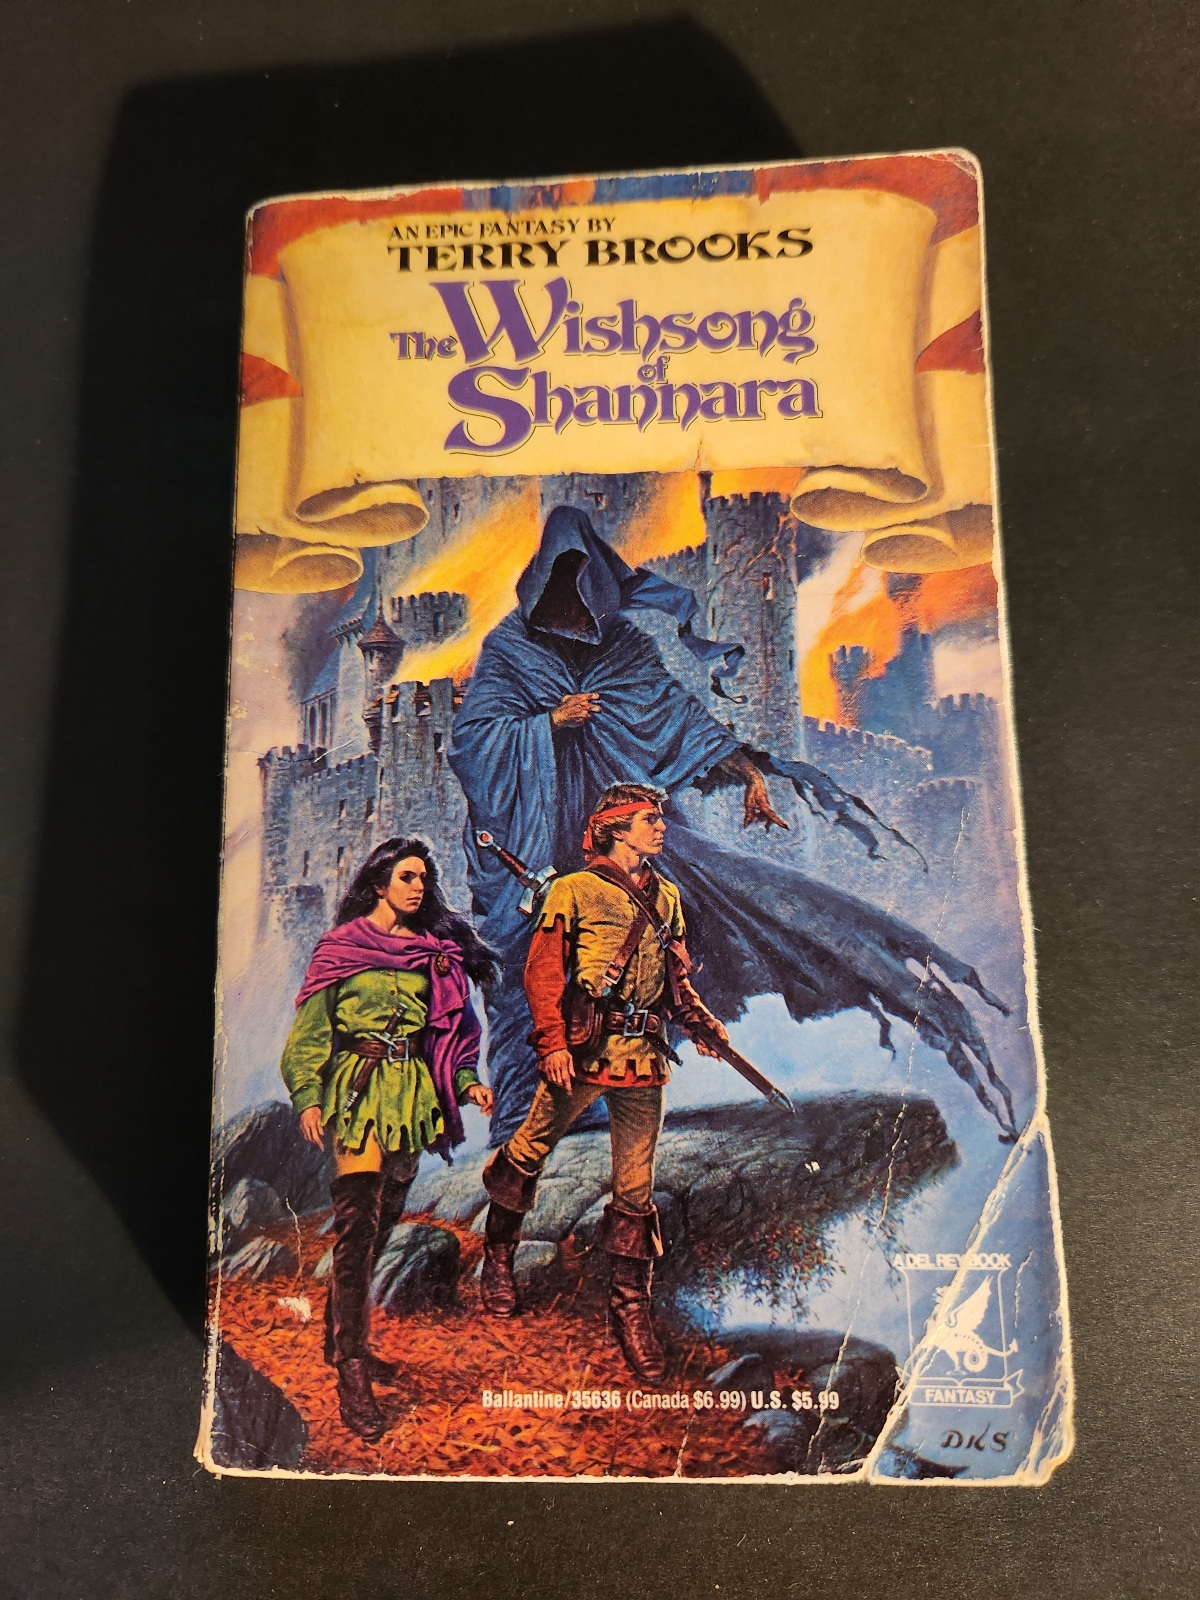 The Wishsong of Shannara by Terry Brooks 1992